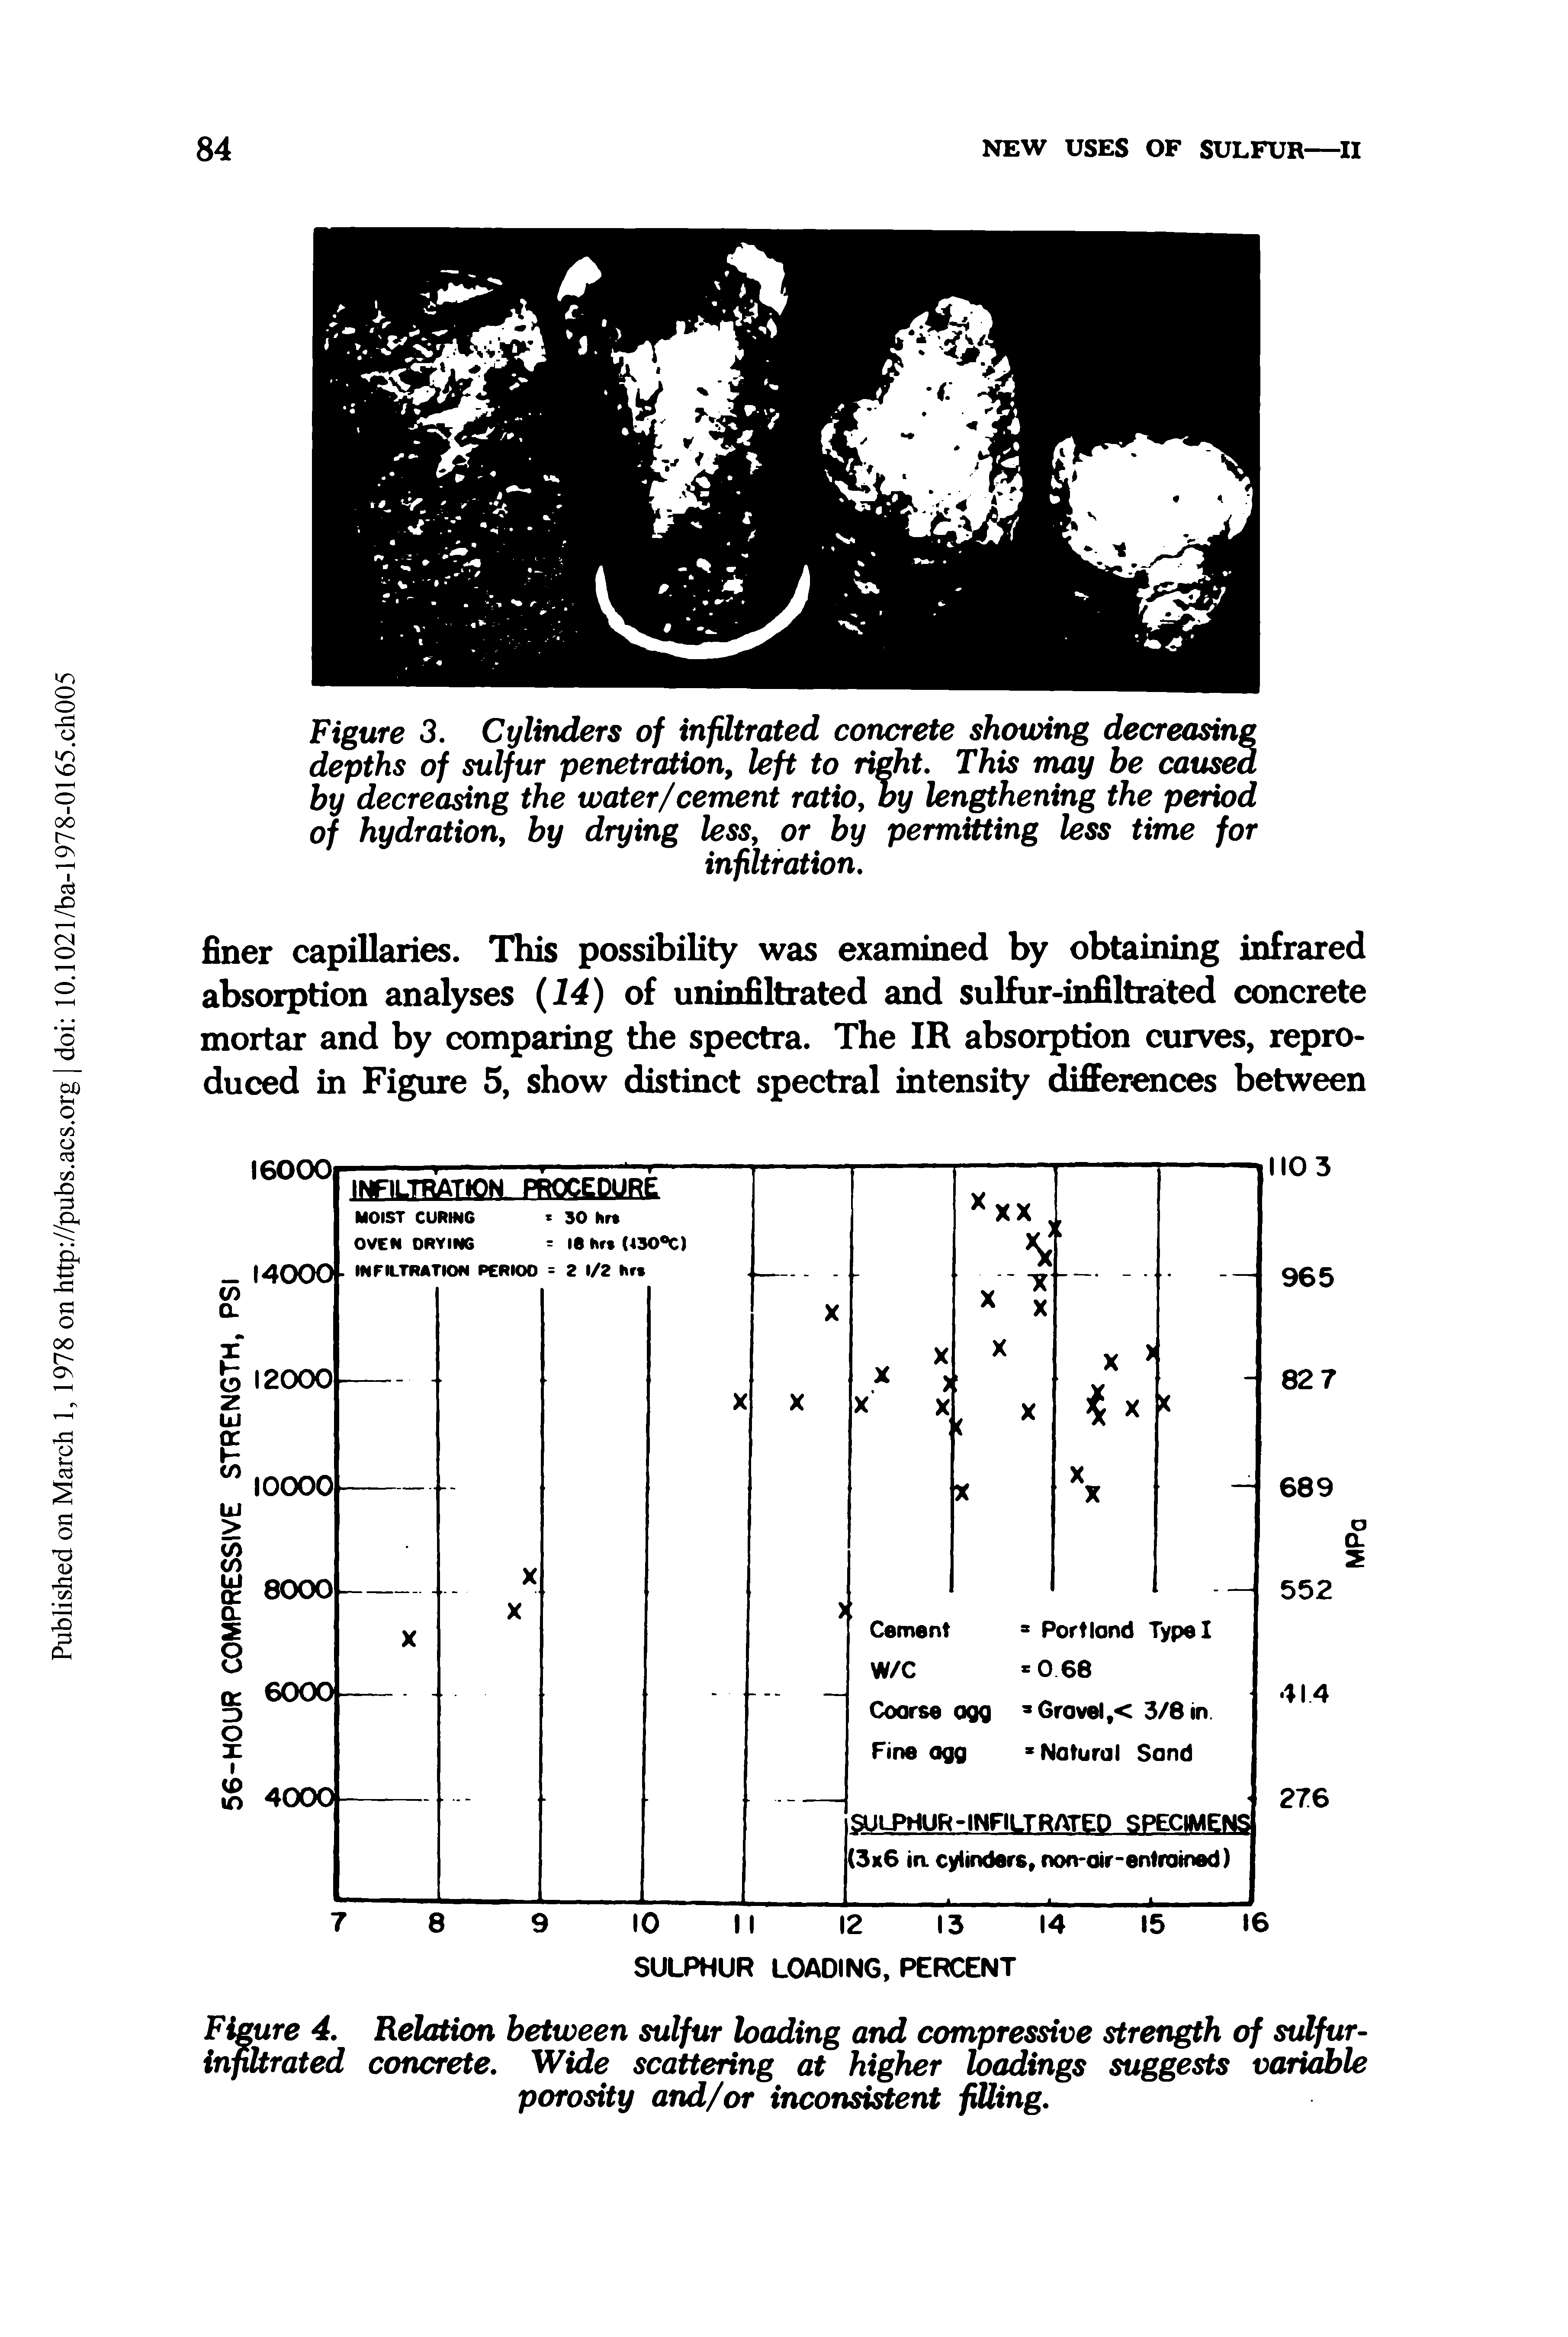 Figure 4. Relation between sulfur loading and compressive strength of sulfur-infiltrated concrete. Wide scattering at higher loadings suggests variable porosity and/or inconsistent filling.